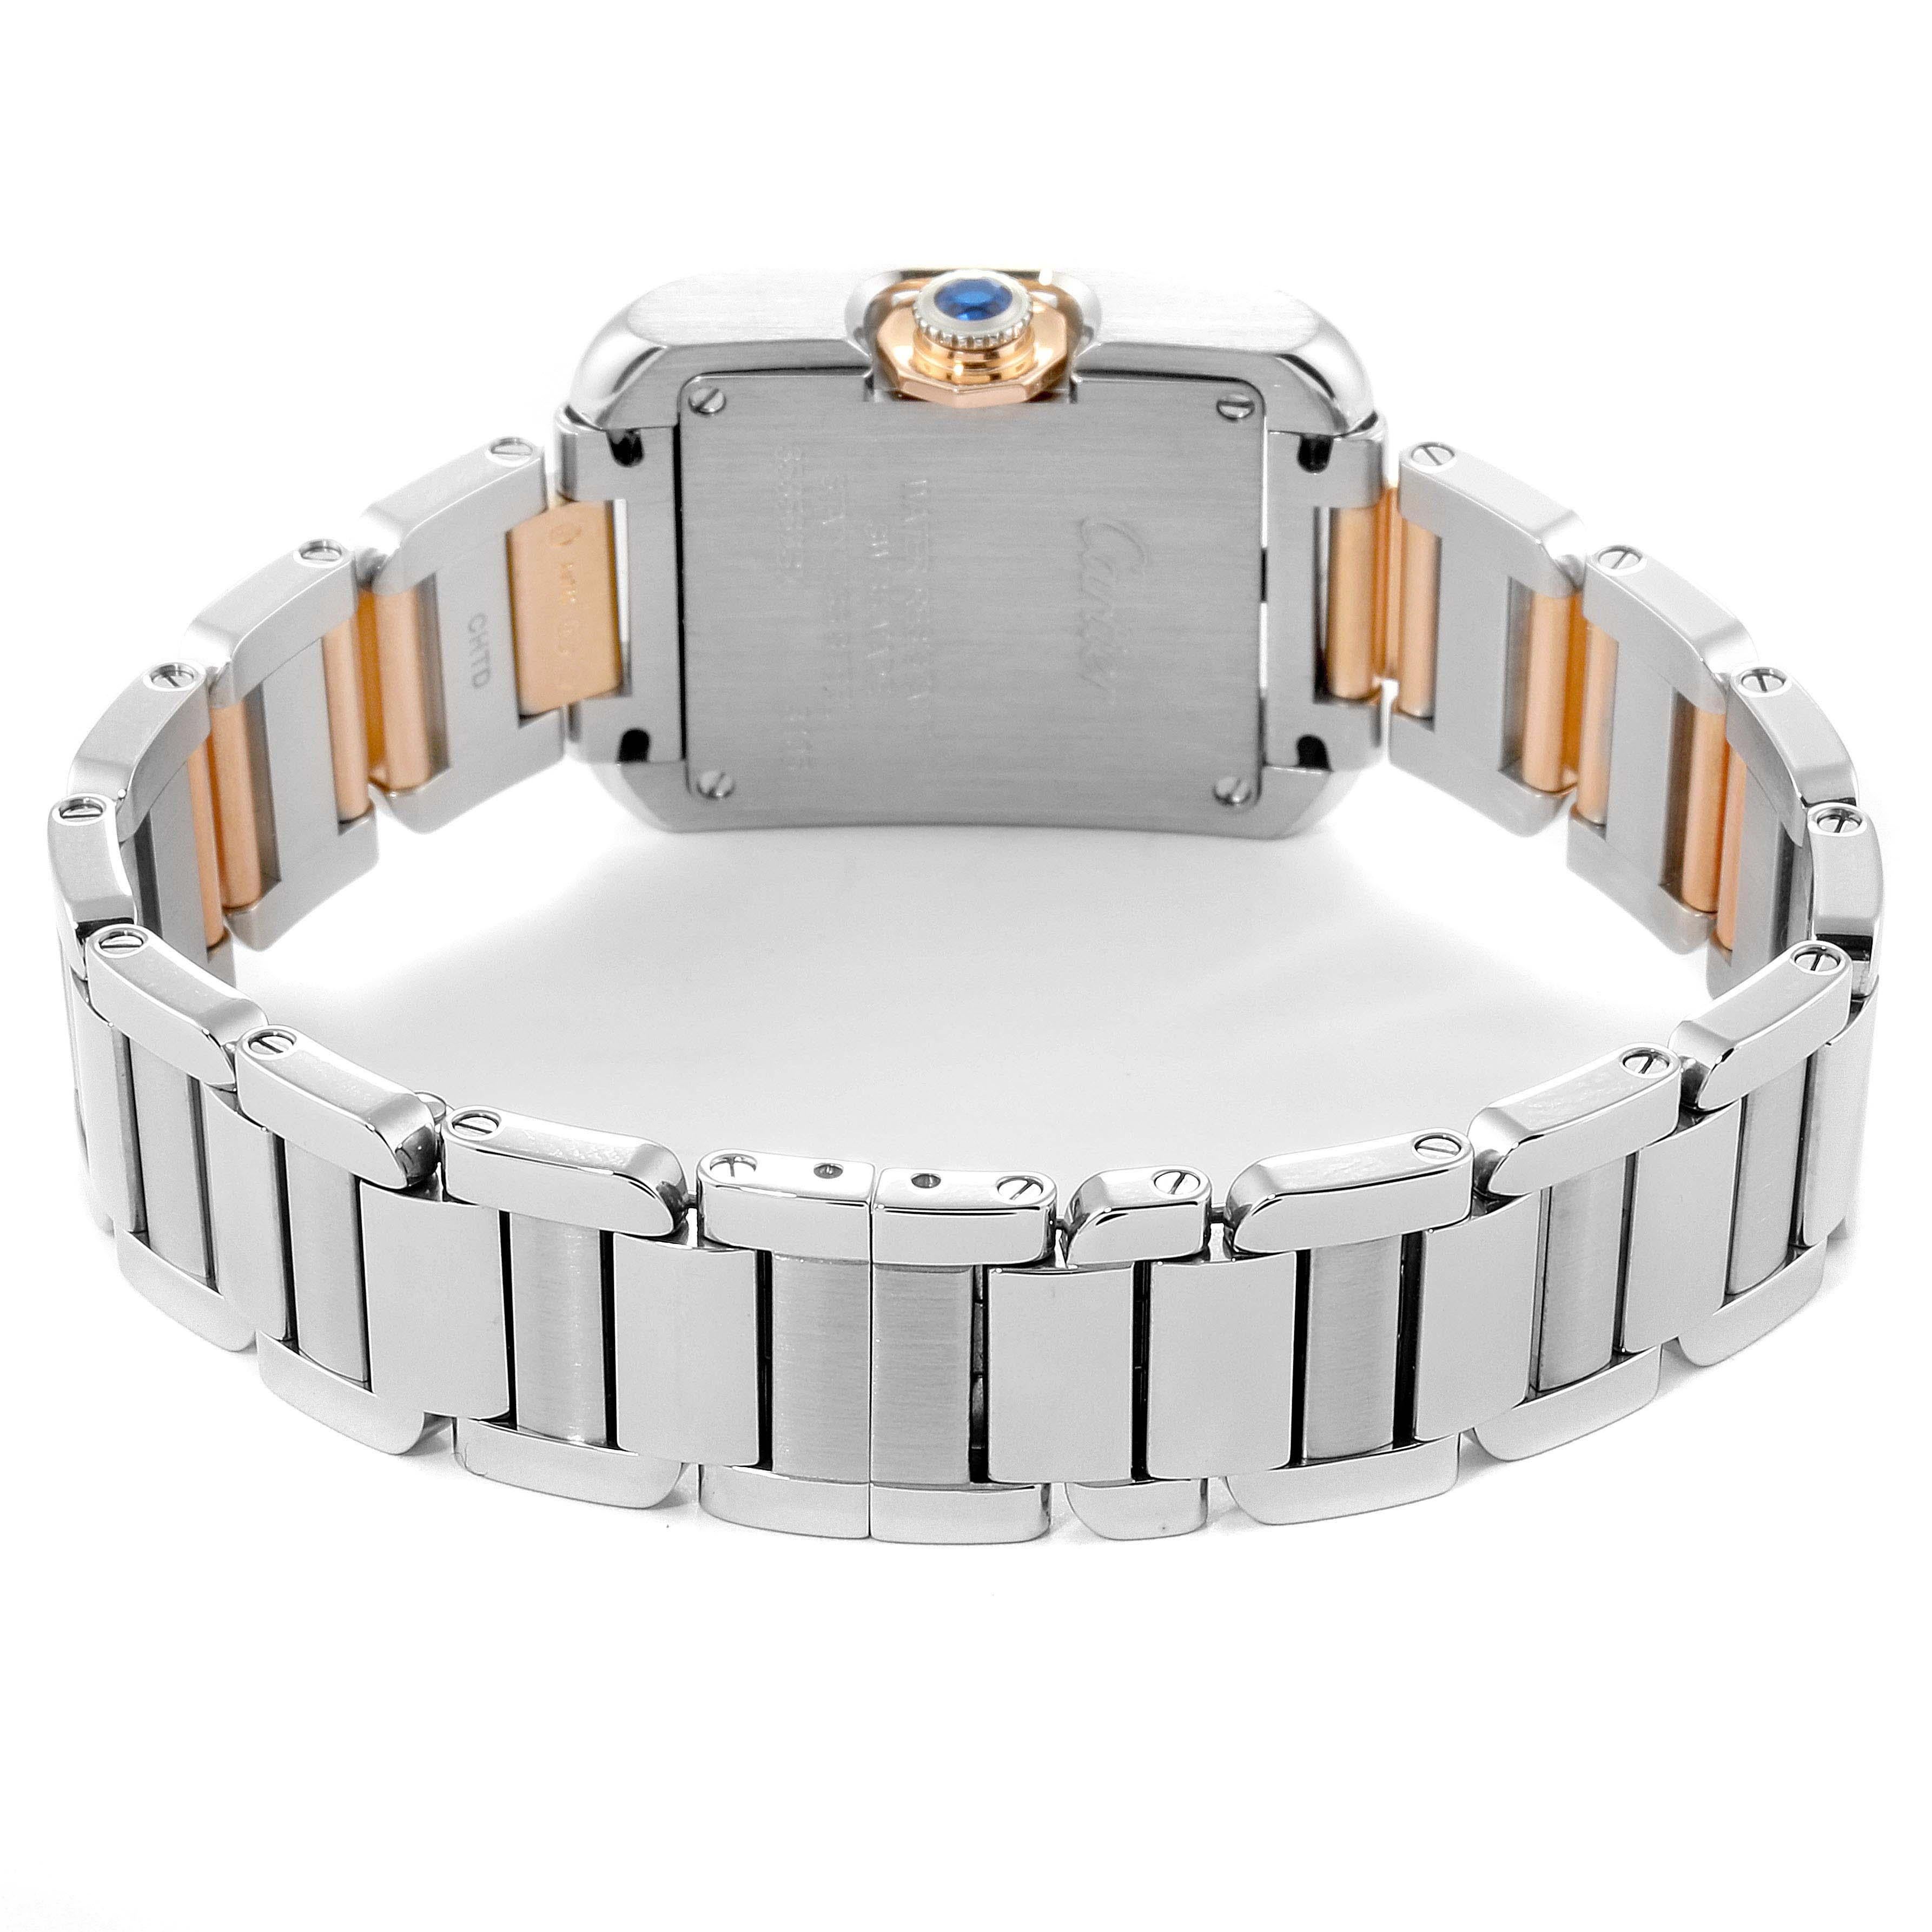 Cartier Tank Anglaise Small Steel 18 Karat Rose Gold Diamond Watch WT100024 For Sale 3